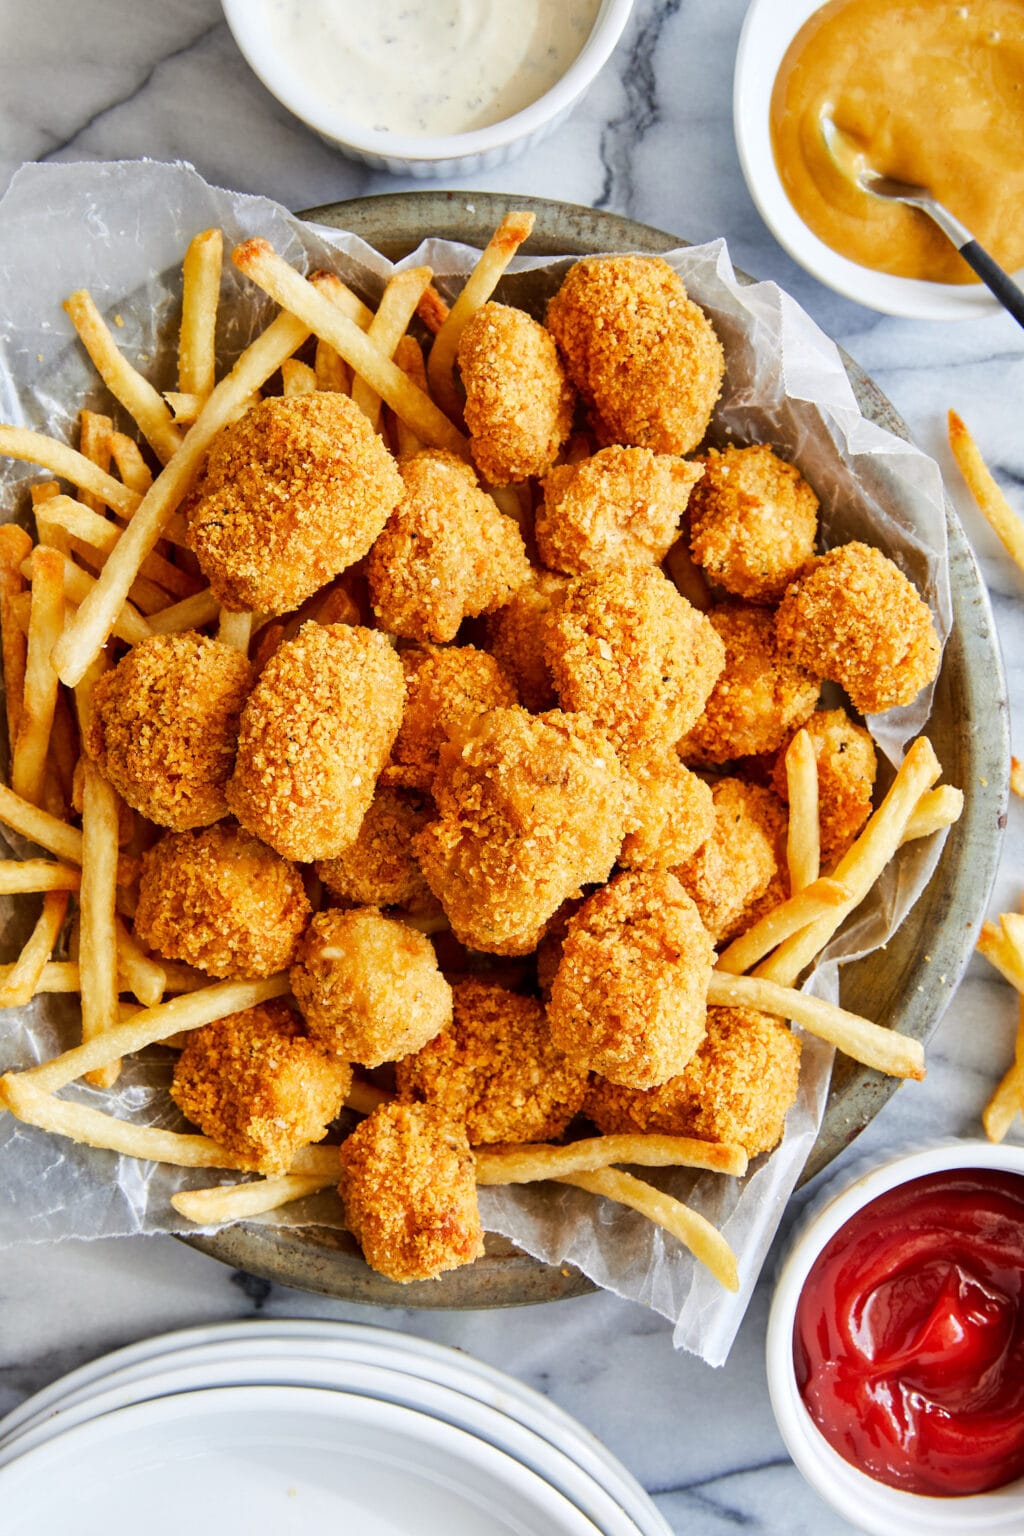 Impossible Crispy Baked Chicken Nuggets Better Than KFC